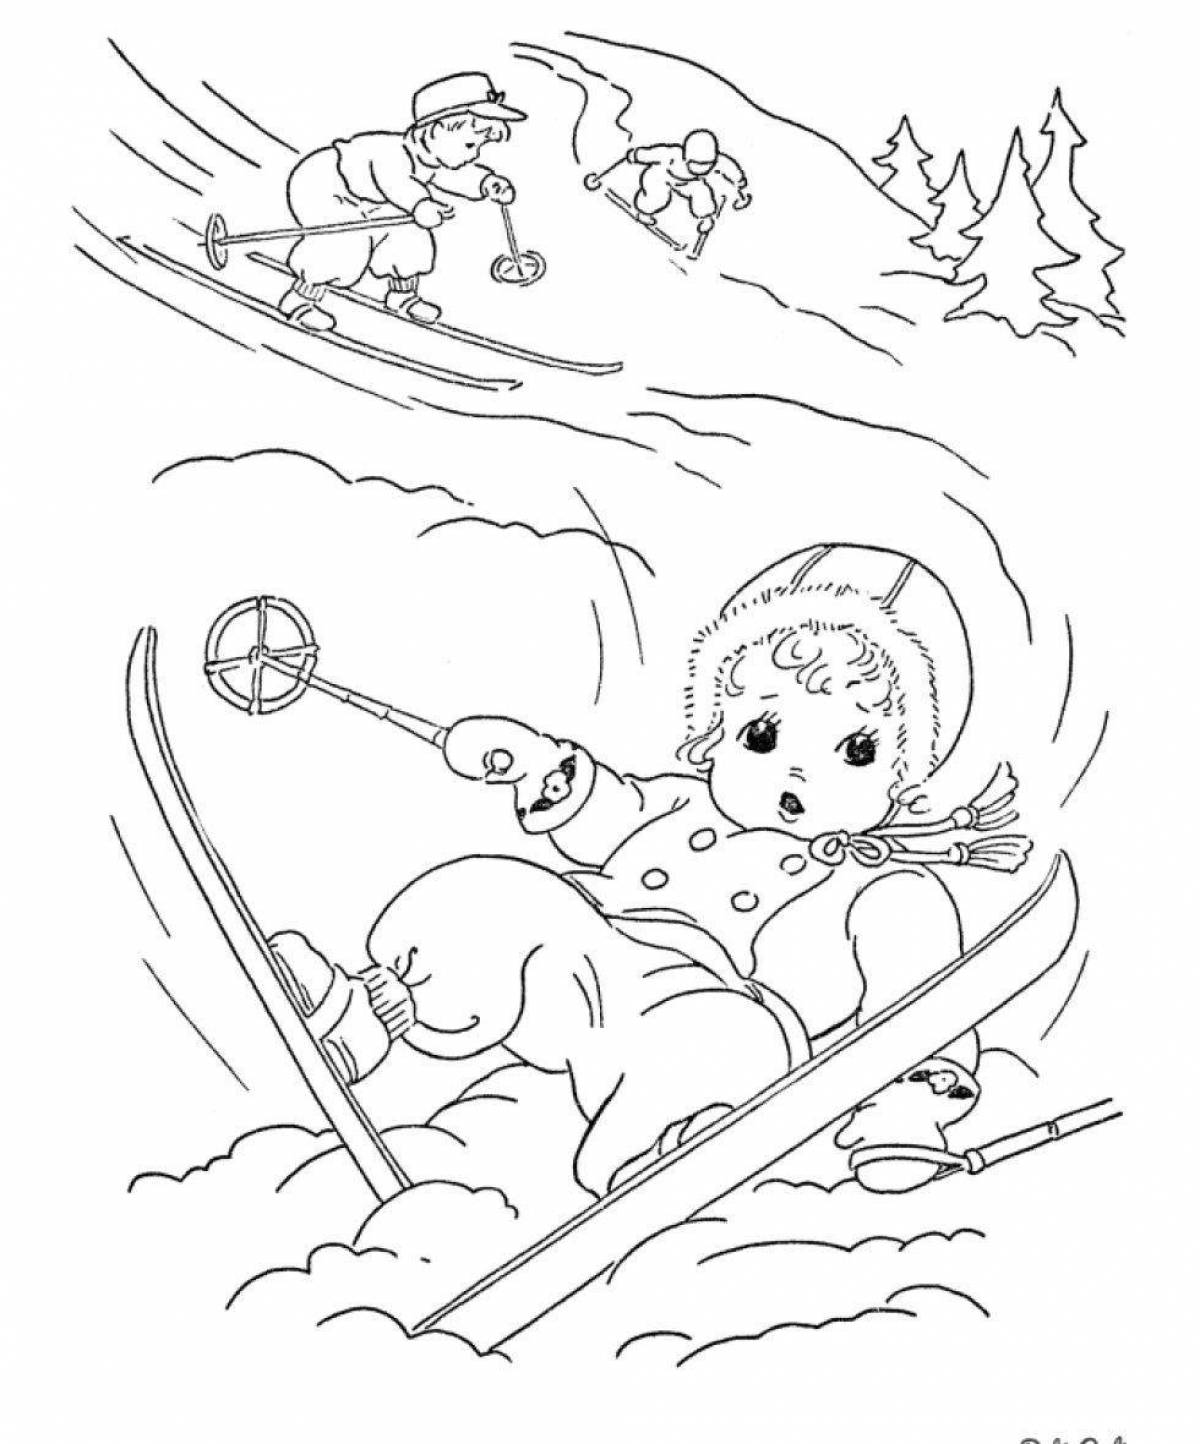 Cute ice safety coloring page